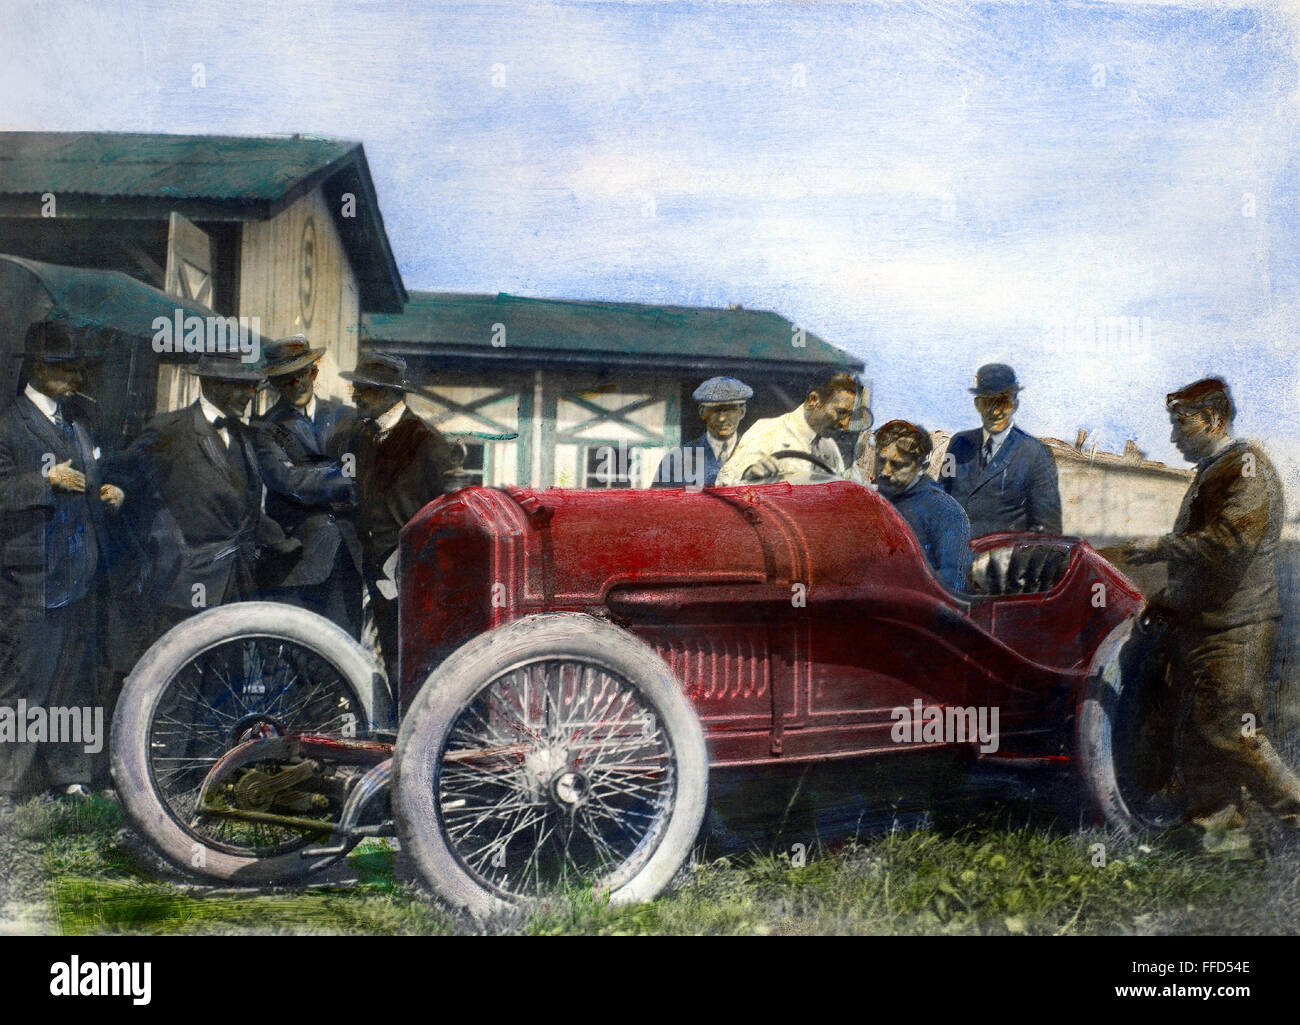 RACE CAR, 1914. /nFrench racing driver Georges Boillot behind the wheel of a Peugeot, receiving instructions from his teammate, Jules Goux (in white), prior to the 1914 Indianapolis 500 mile race. Stock Photo